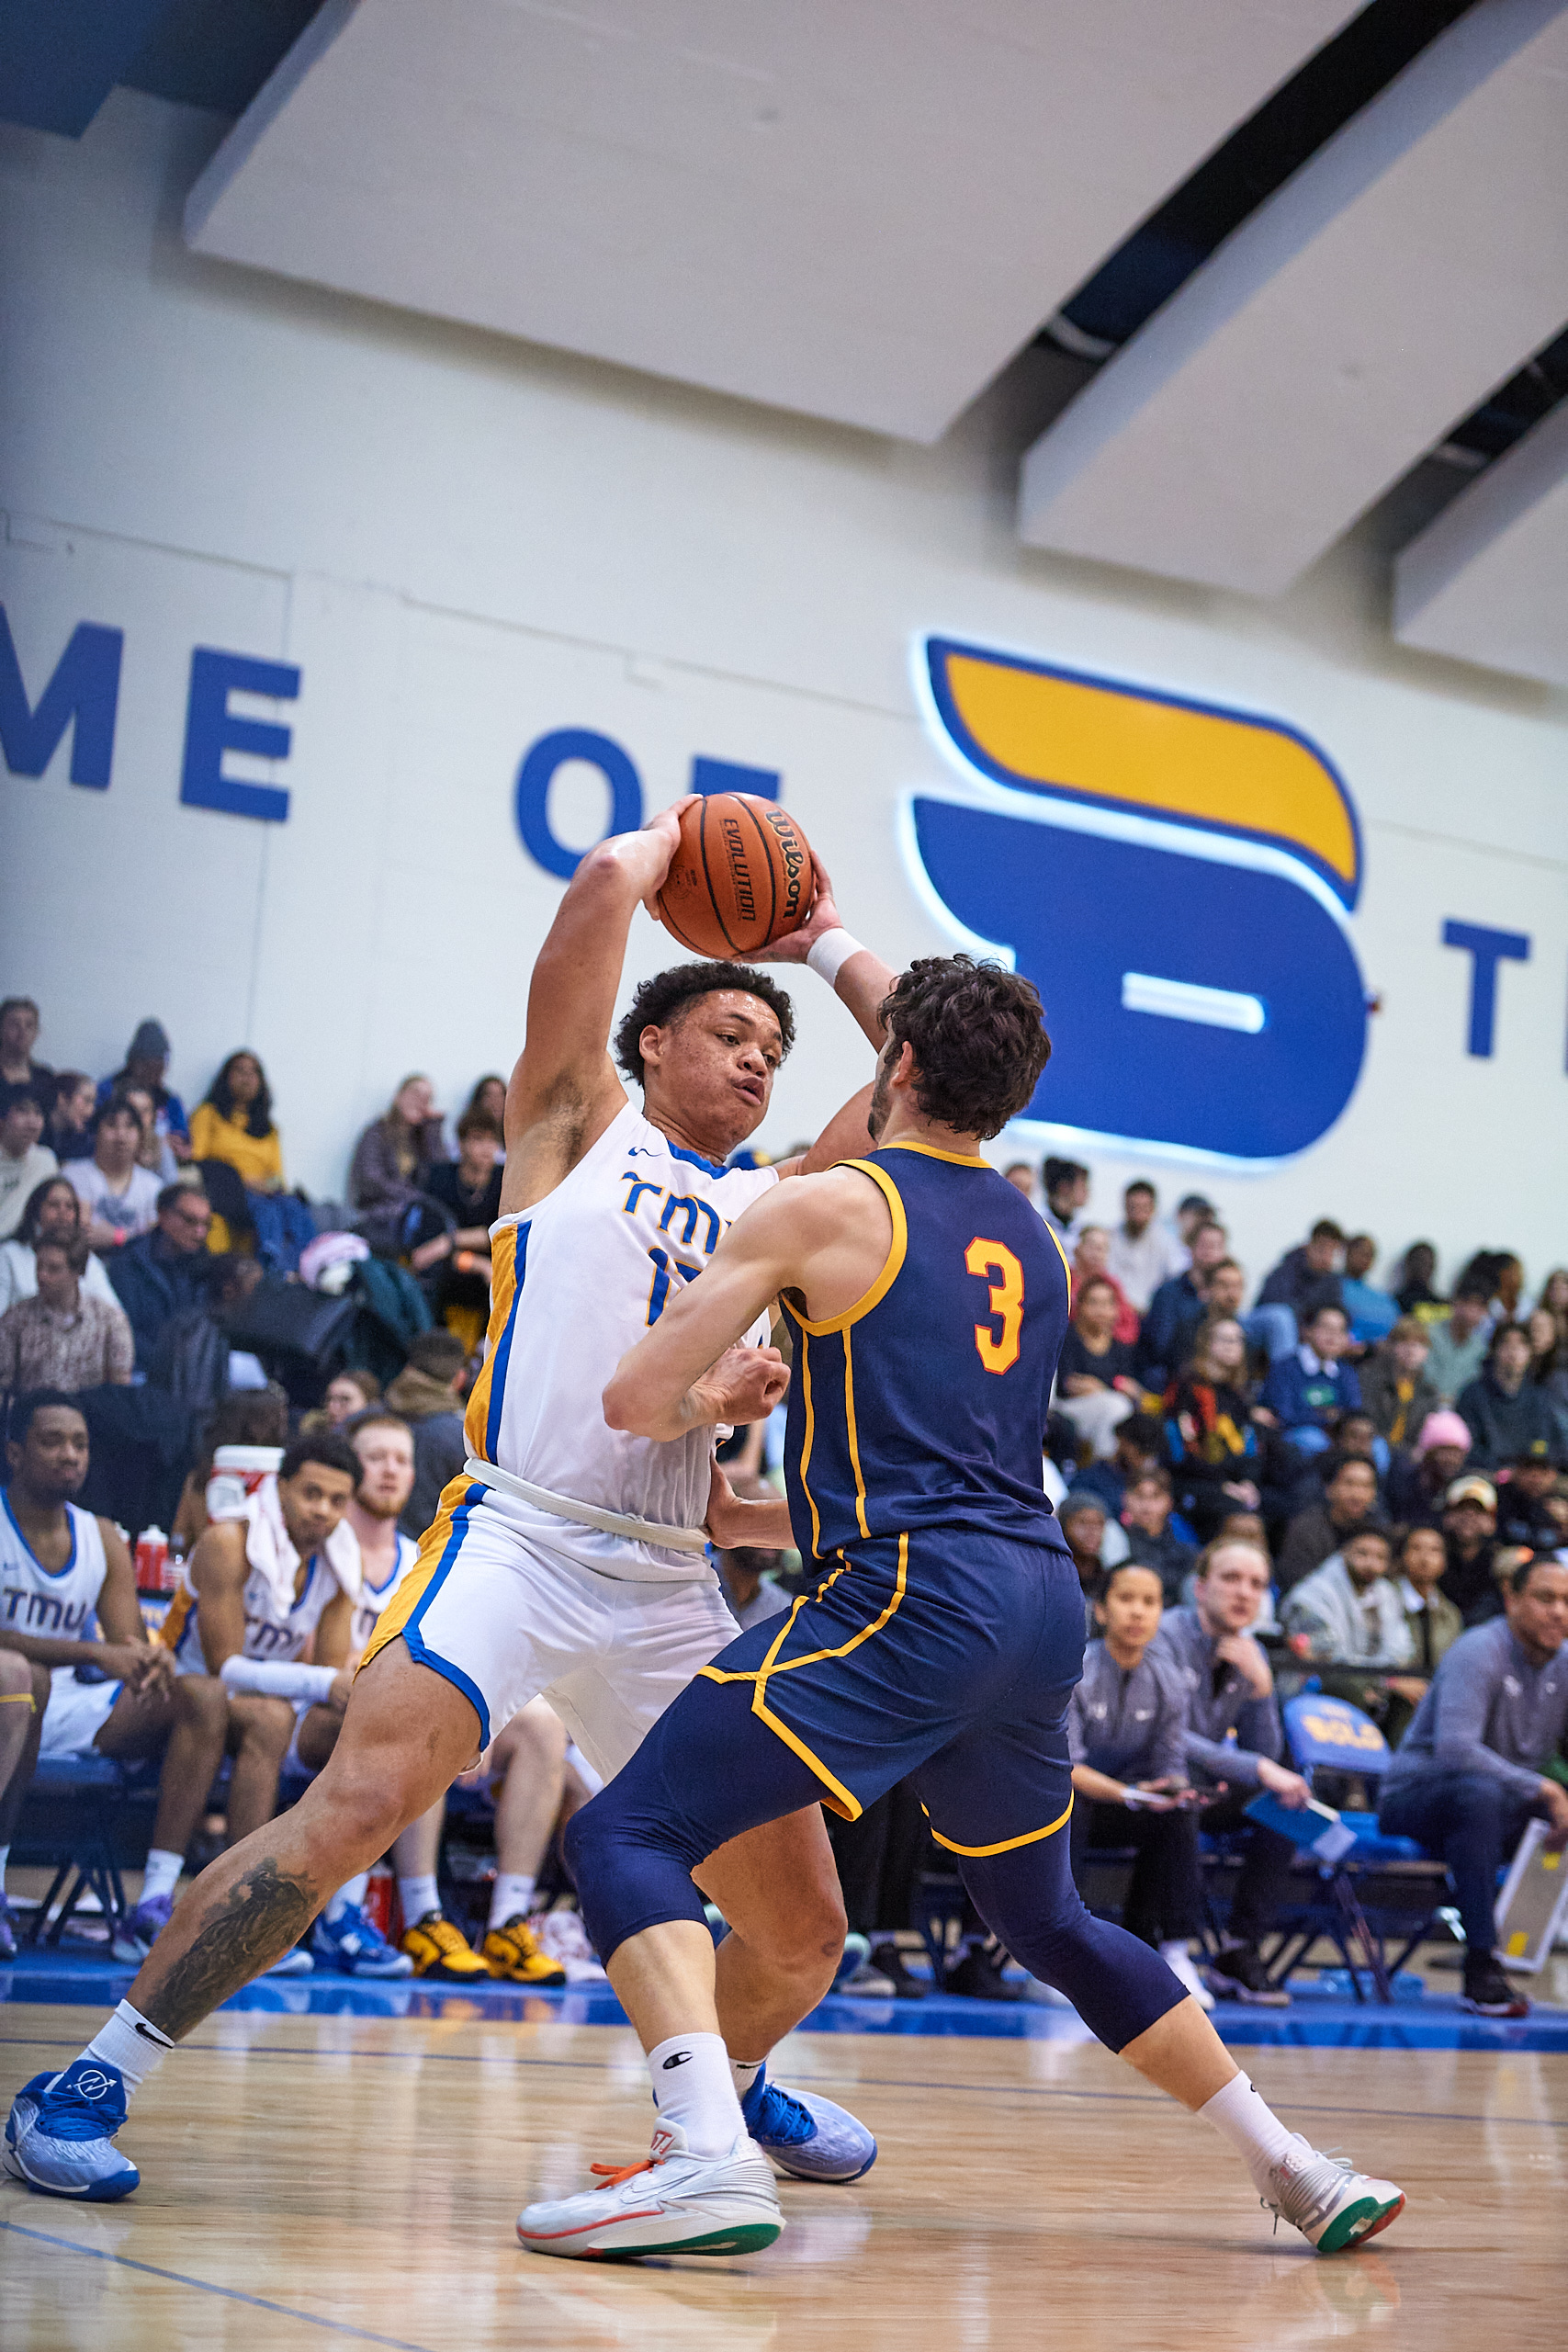 TMU men's basketball player Aaron Rhooms holds the ball over his head while being guarded by Queen's player